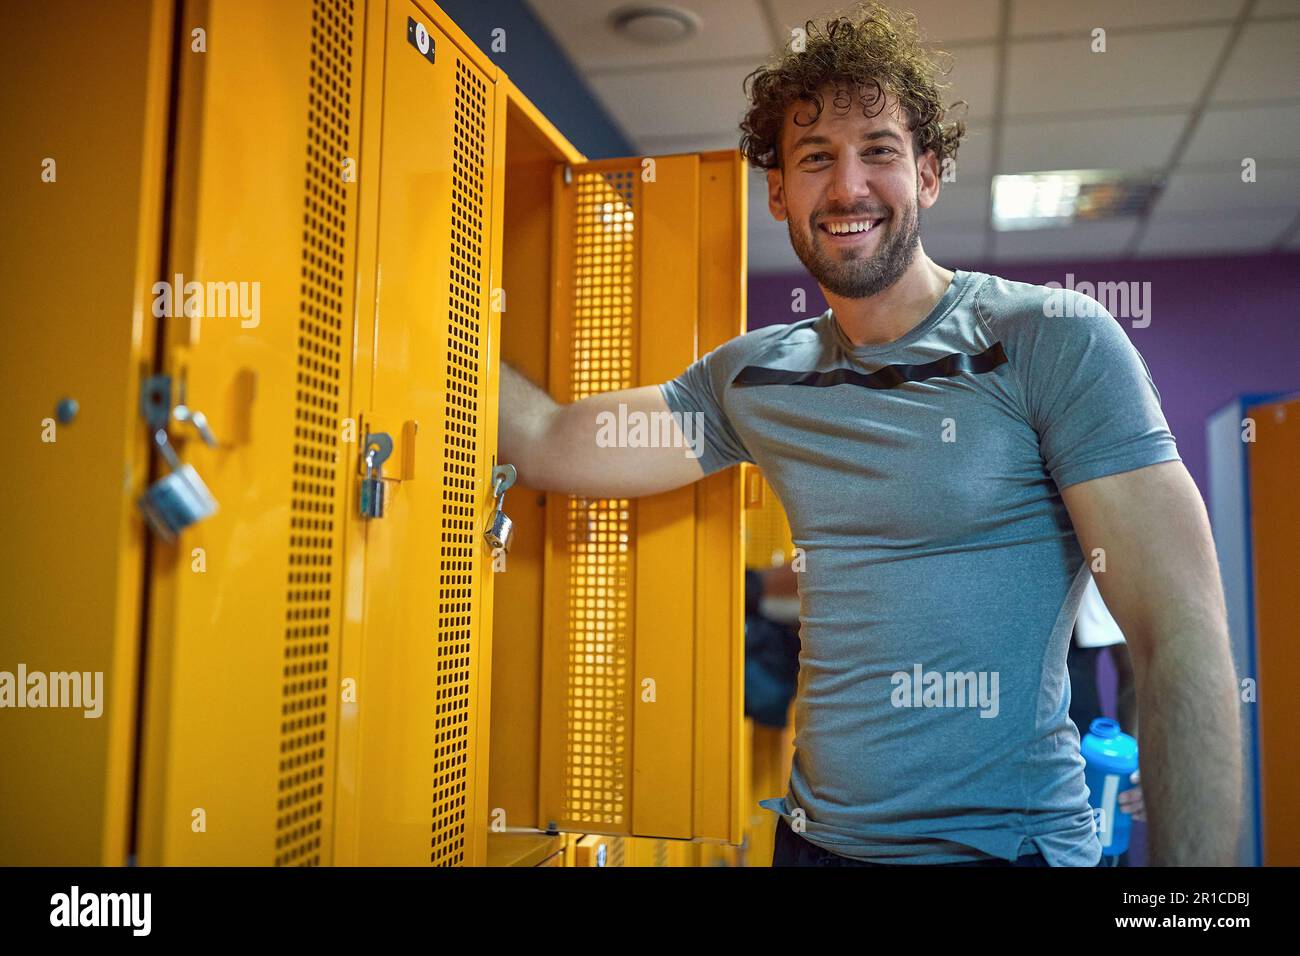 Cheerful young man standing in gym locker room, getting ready for workout session. Health, lifestyle concept. Stock Photo